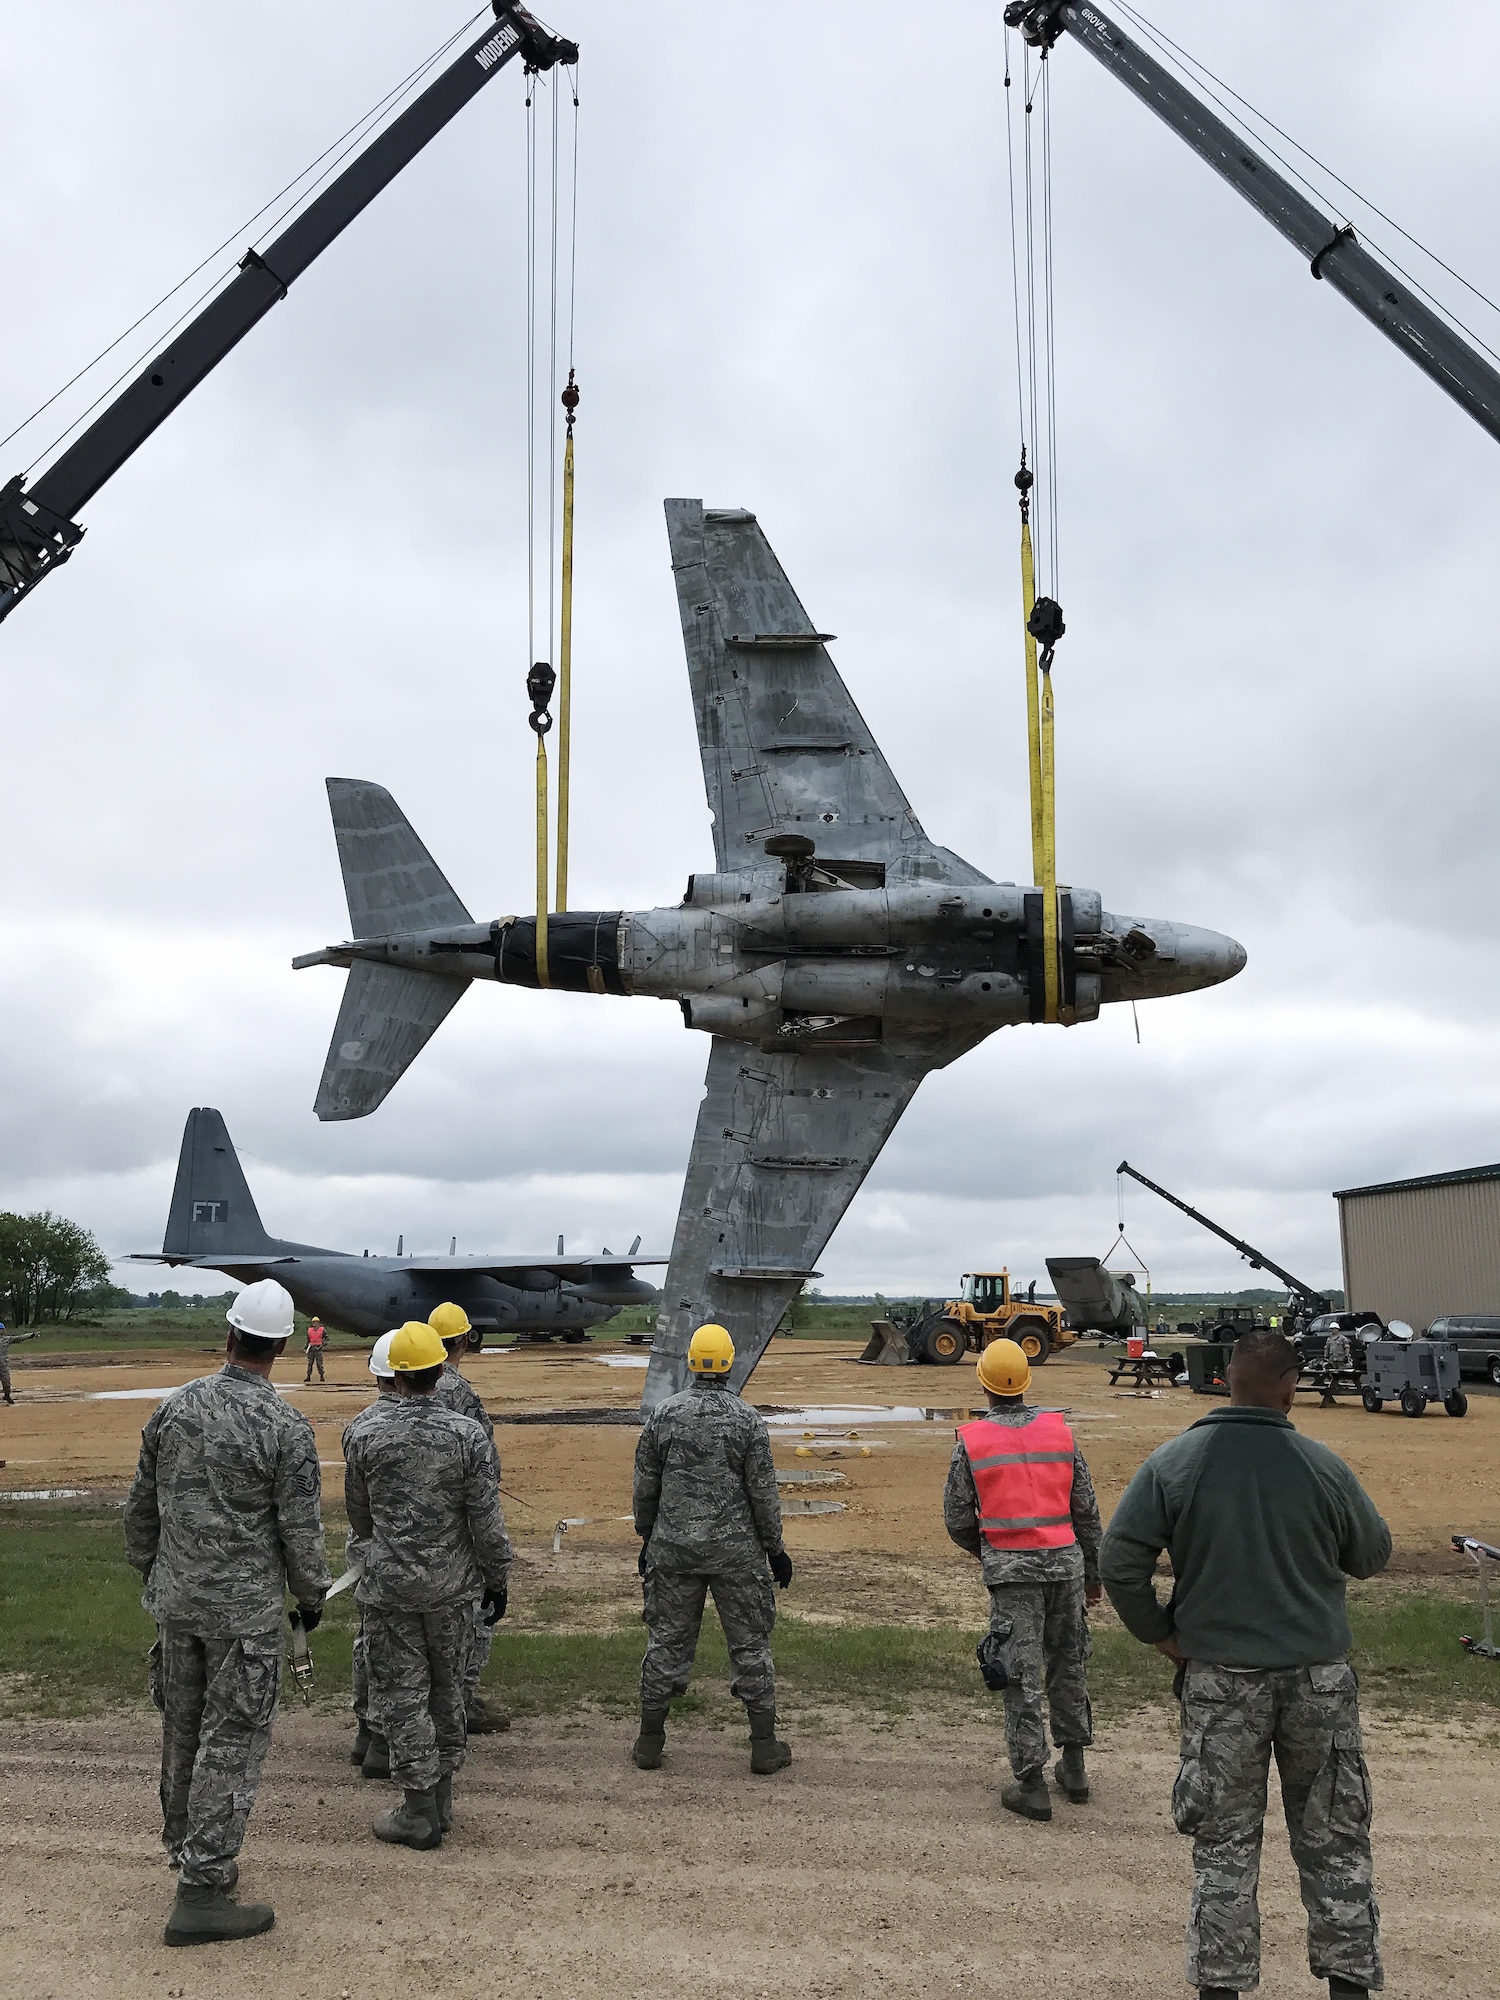 Students lift a 21,000 pound decommissioned A-6E Intruder Navy plane during a Crash Damage or Disabled Aircraft Recovery (CDDAR) training course at Volk Field Air National Guard base on May 23. In the simulation, the aircraft was found upside down and students must rig the aircraft and conduct a complex lift and roll maneuver. During the procedure, the appointed team chief, who is also a student in the class, coordinates the task with the two crane operators. Wisconsin National Guard photo by Maj. Penny Ripperger